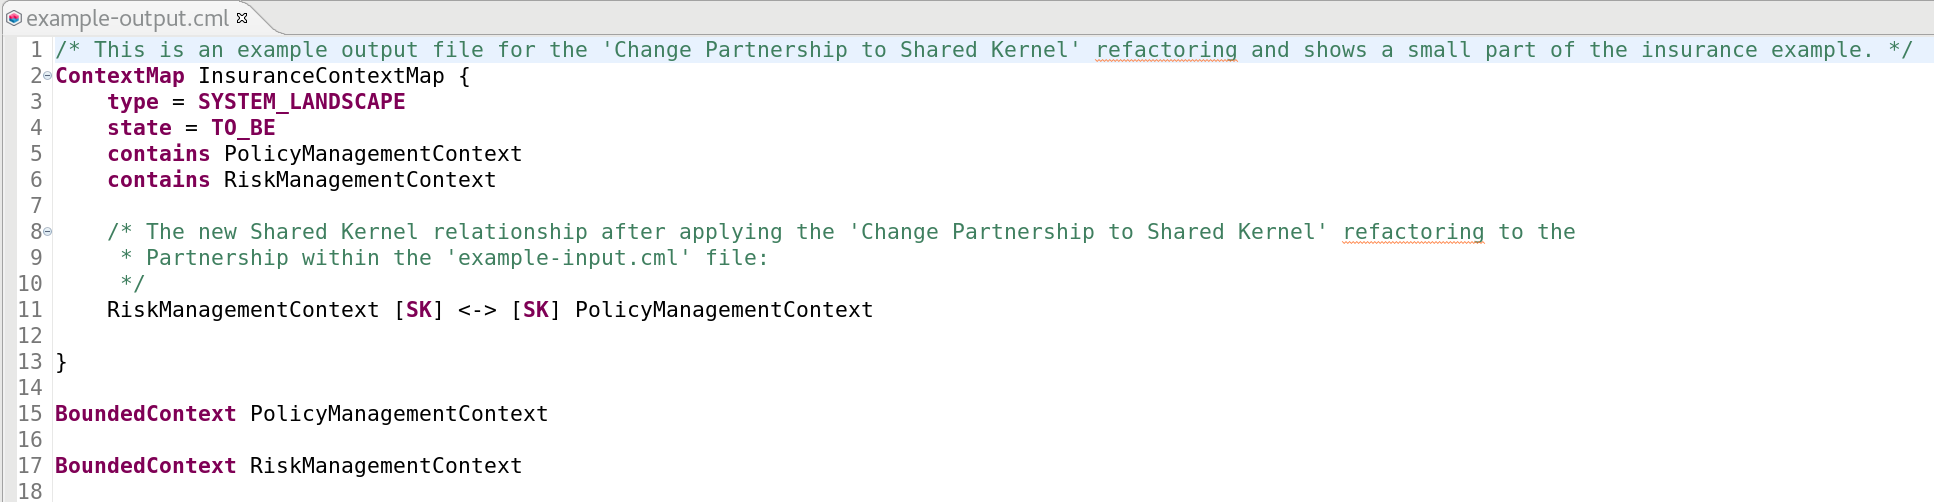 Change Partnership to Shared Kernel Example Output